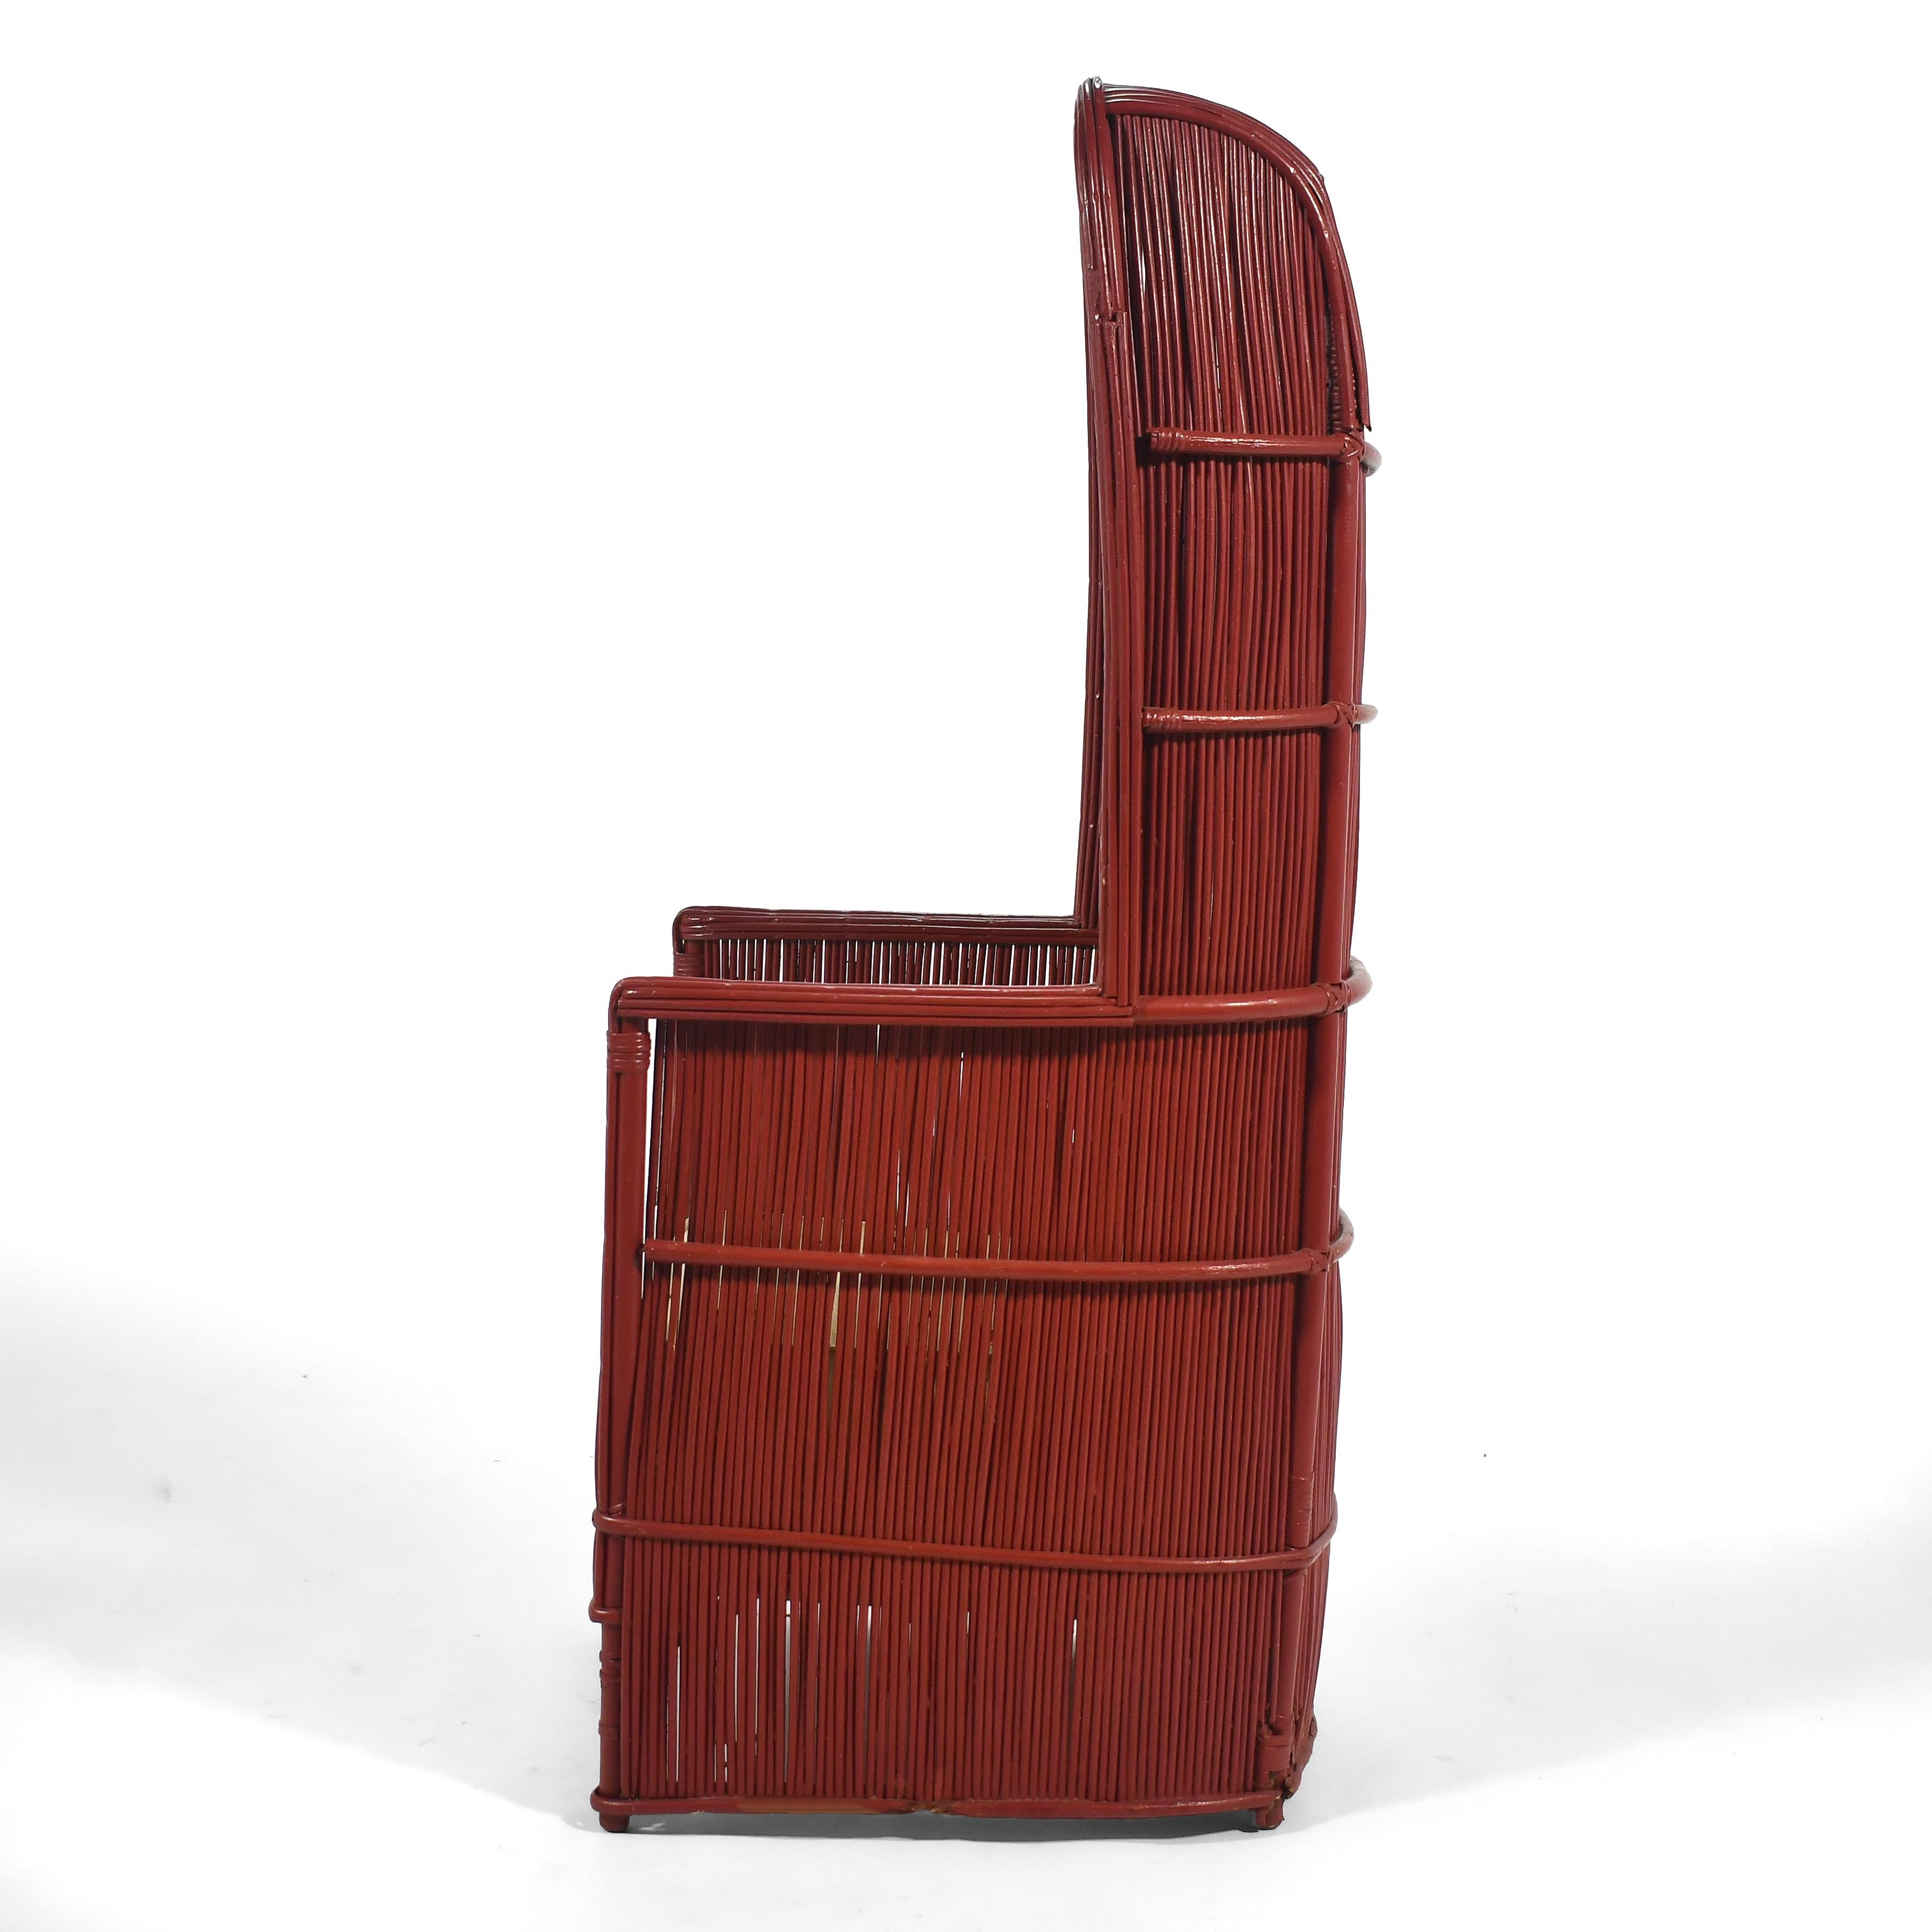 Vermilion Red Rattan Canopy Chair In Good Condition For Sale In Highland, IN